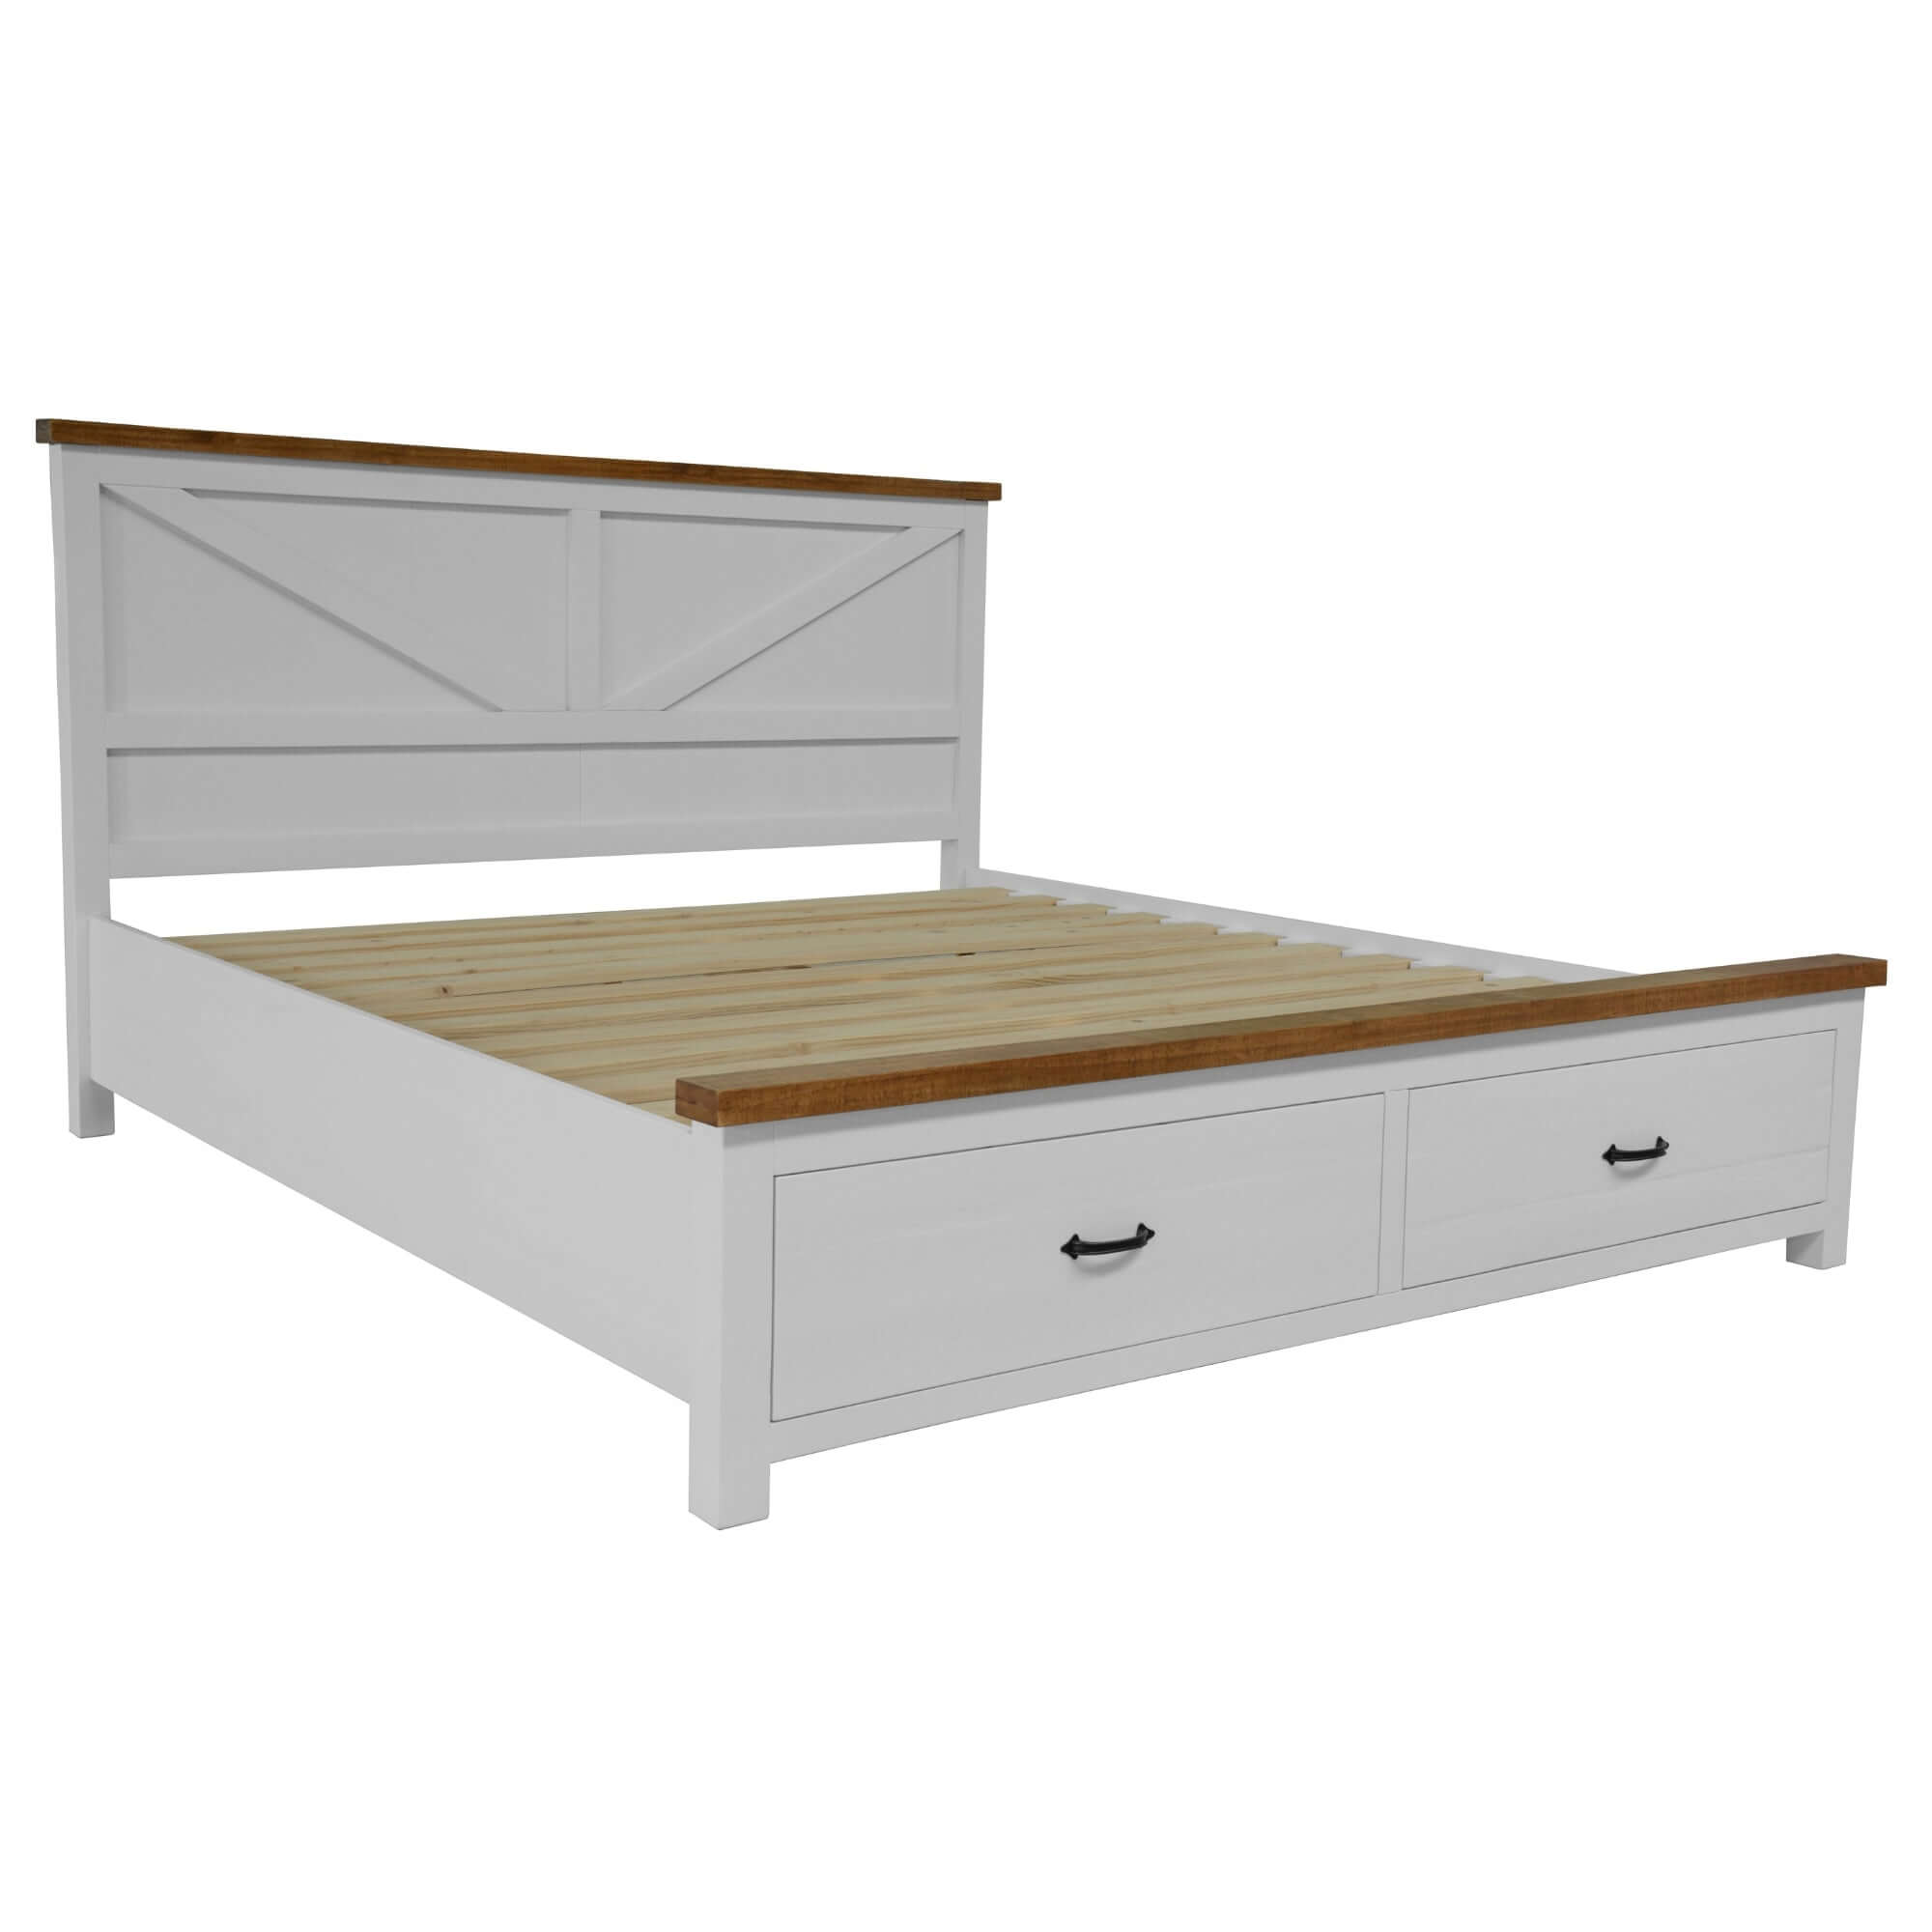 Grandy Queen Bed Frame with Storage Drawers-Upinteriors